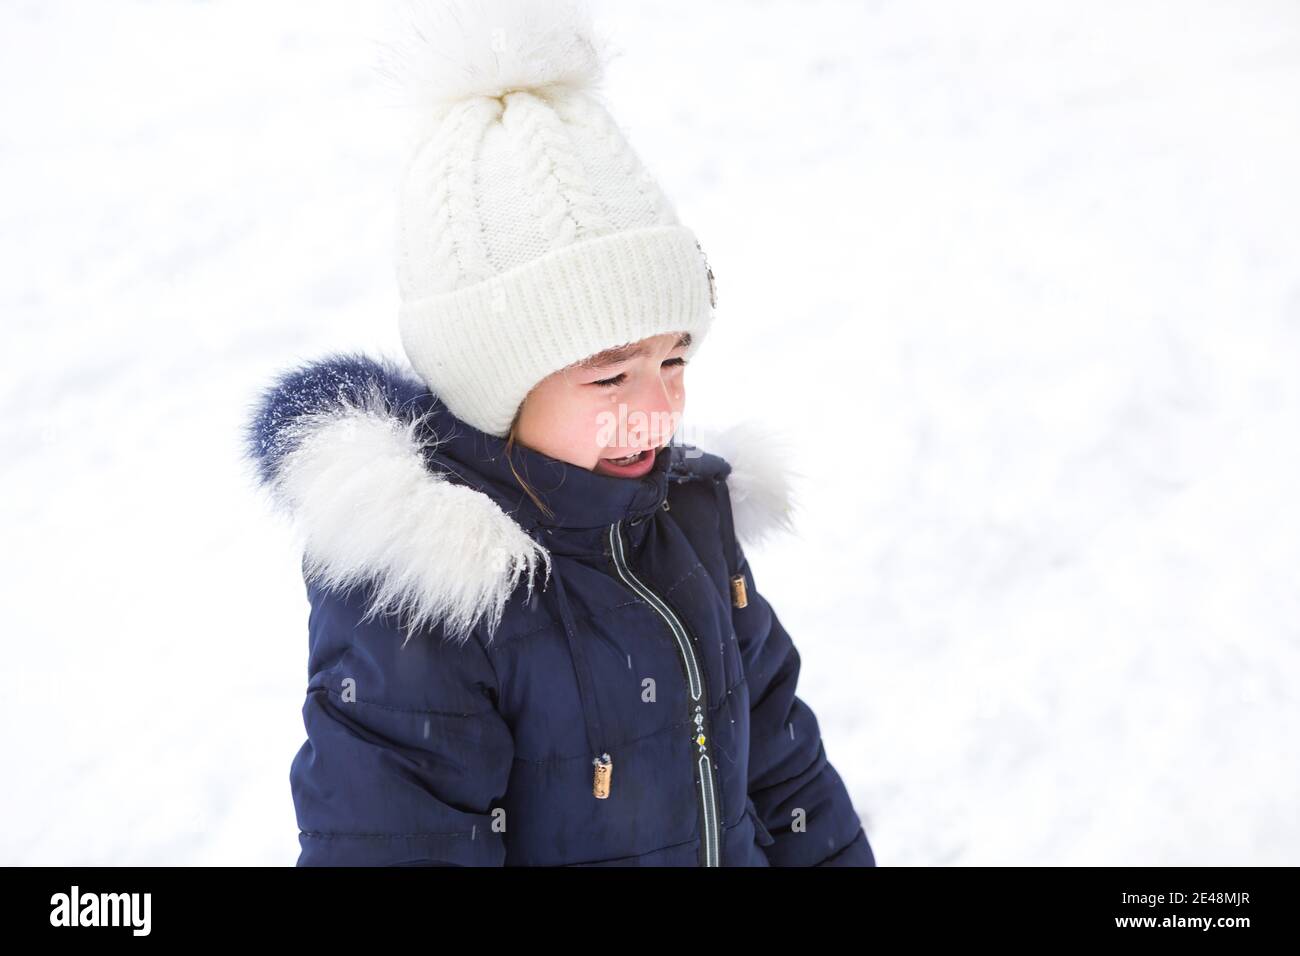 Little girl crying outside in winter. A child in warm clothes is upset, cold, wipes away tears, screams, is capricious and hysterical. Winter, snow, f Stock Photo